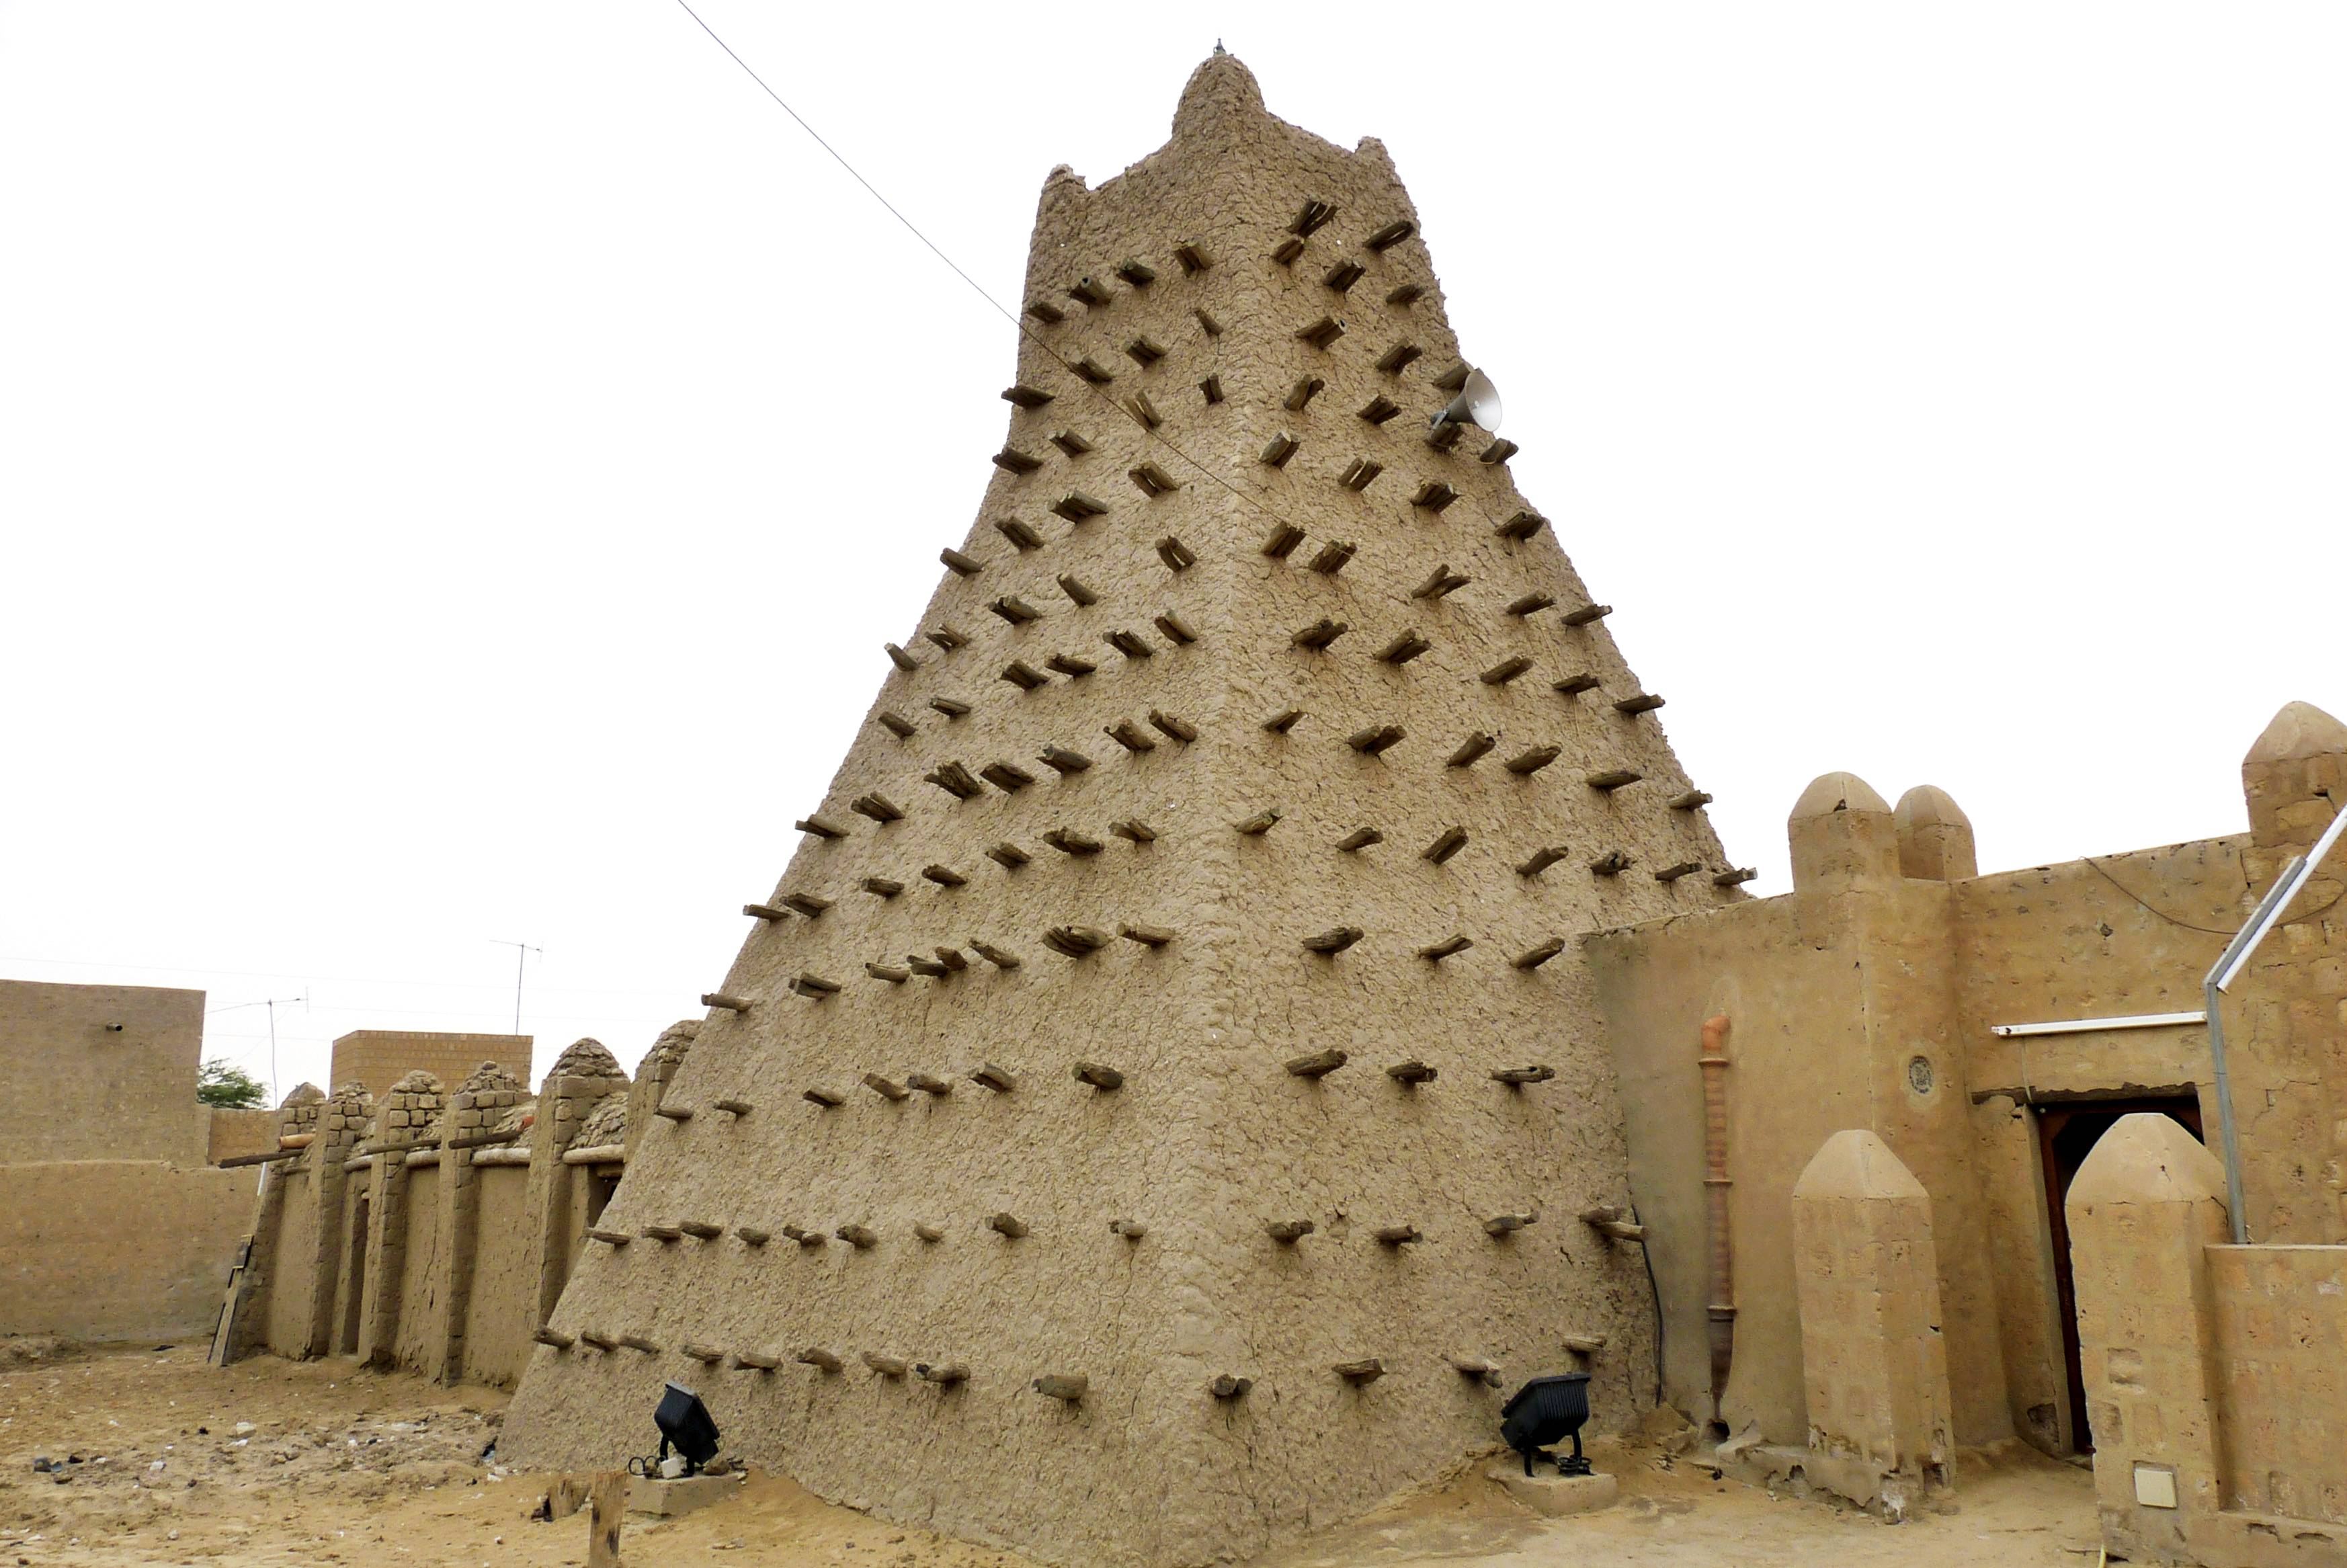 Historic Timbuktu in Danger - Islamist militants in Mali attacked one of the most famous mosques in Timbuktu just days after UNESCO named the city an endangered world heritage site.&nbsp;&nbsp; (Photo: Adama Diarra /LANDOV)